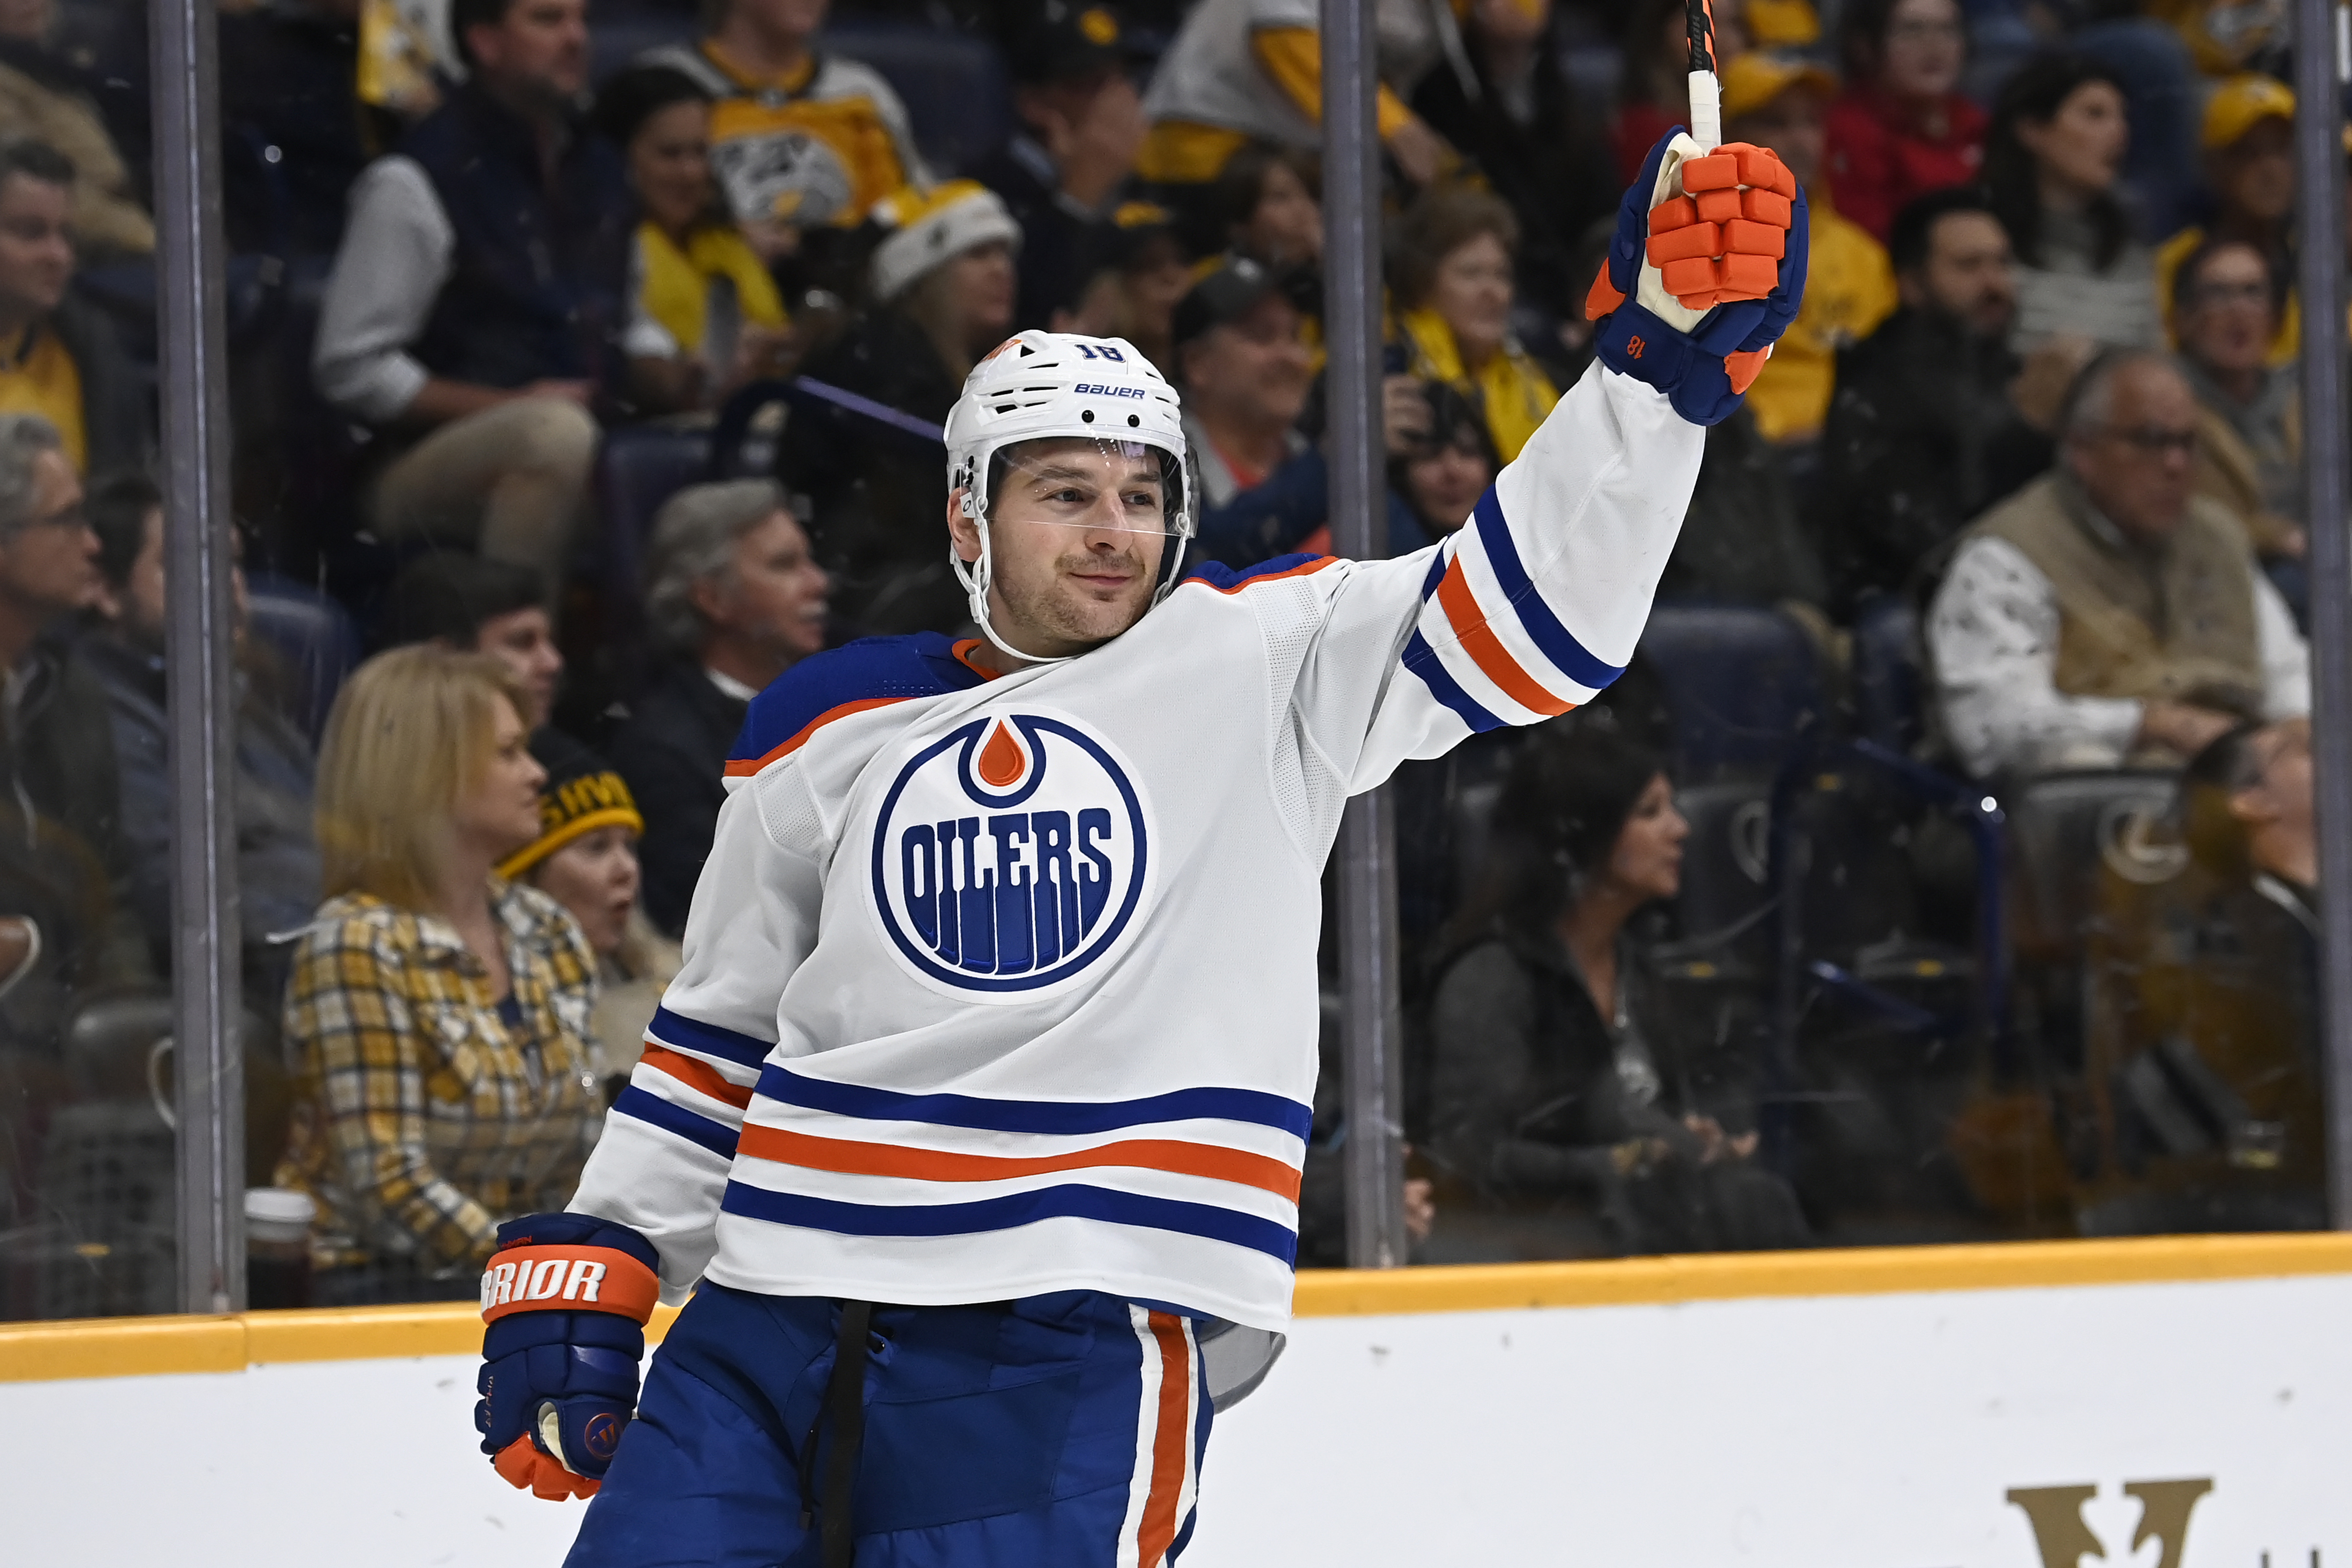 Hockey Night in Canada on X: “It's important to show that hockey players  care” With the Oilers celebrating Pride night on Saturday in Edmonton, Zach  Hyman shares his thoughts on the event